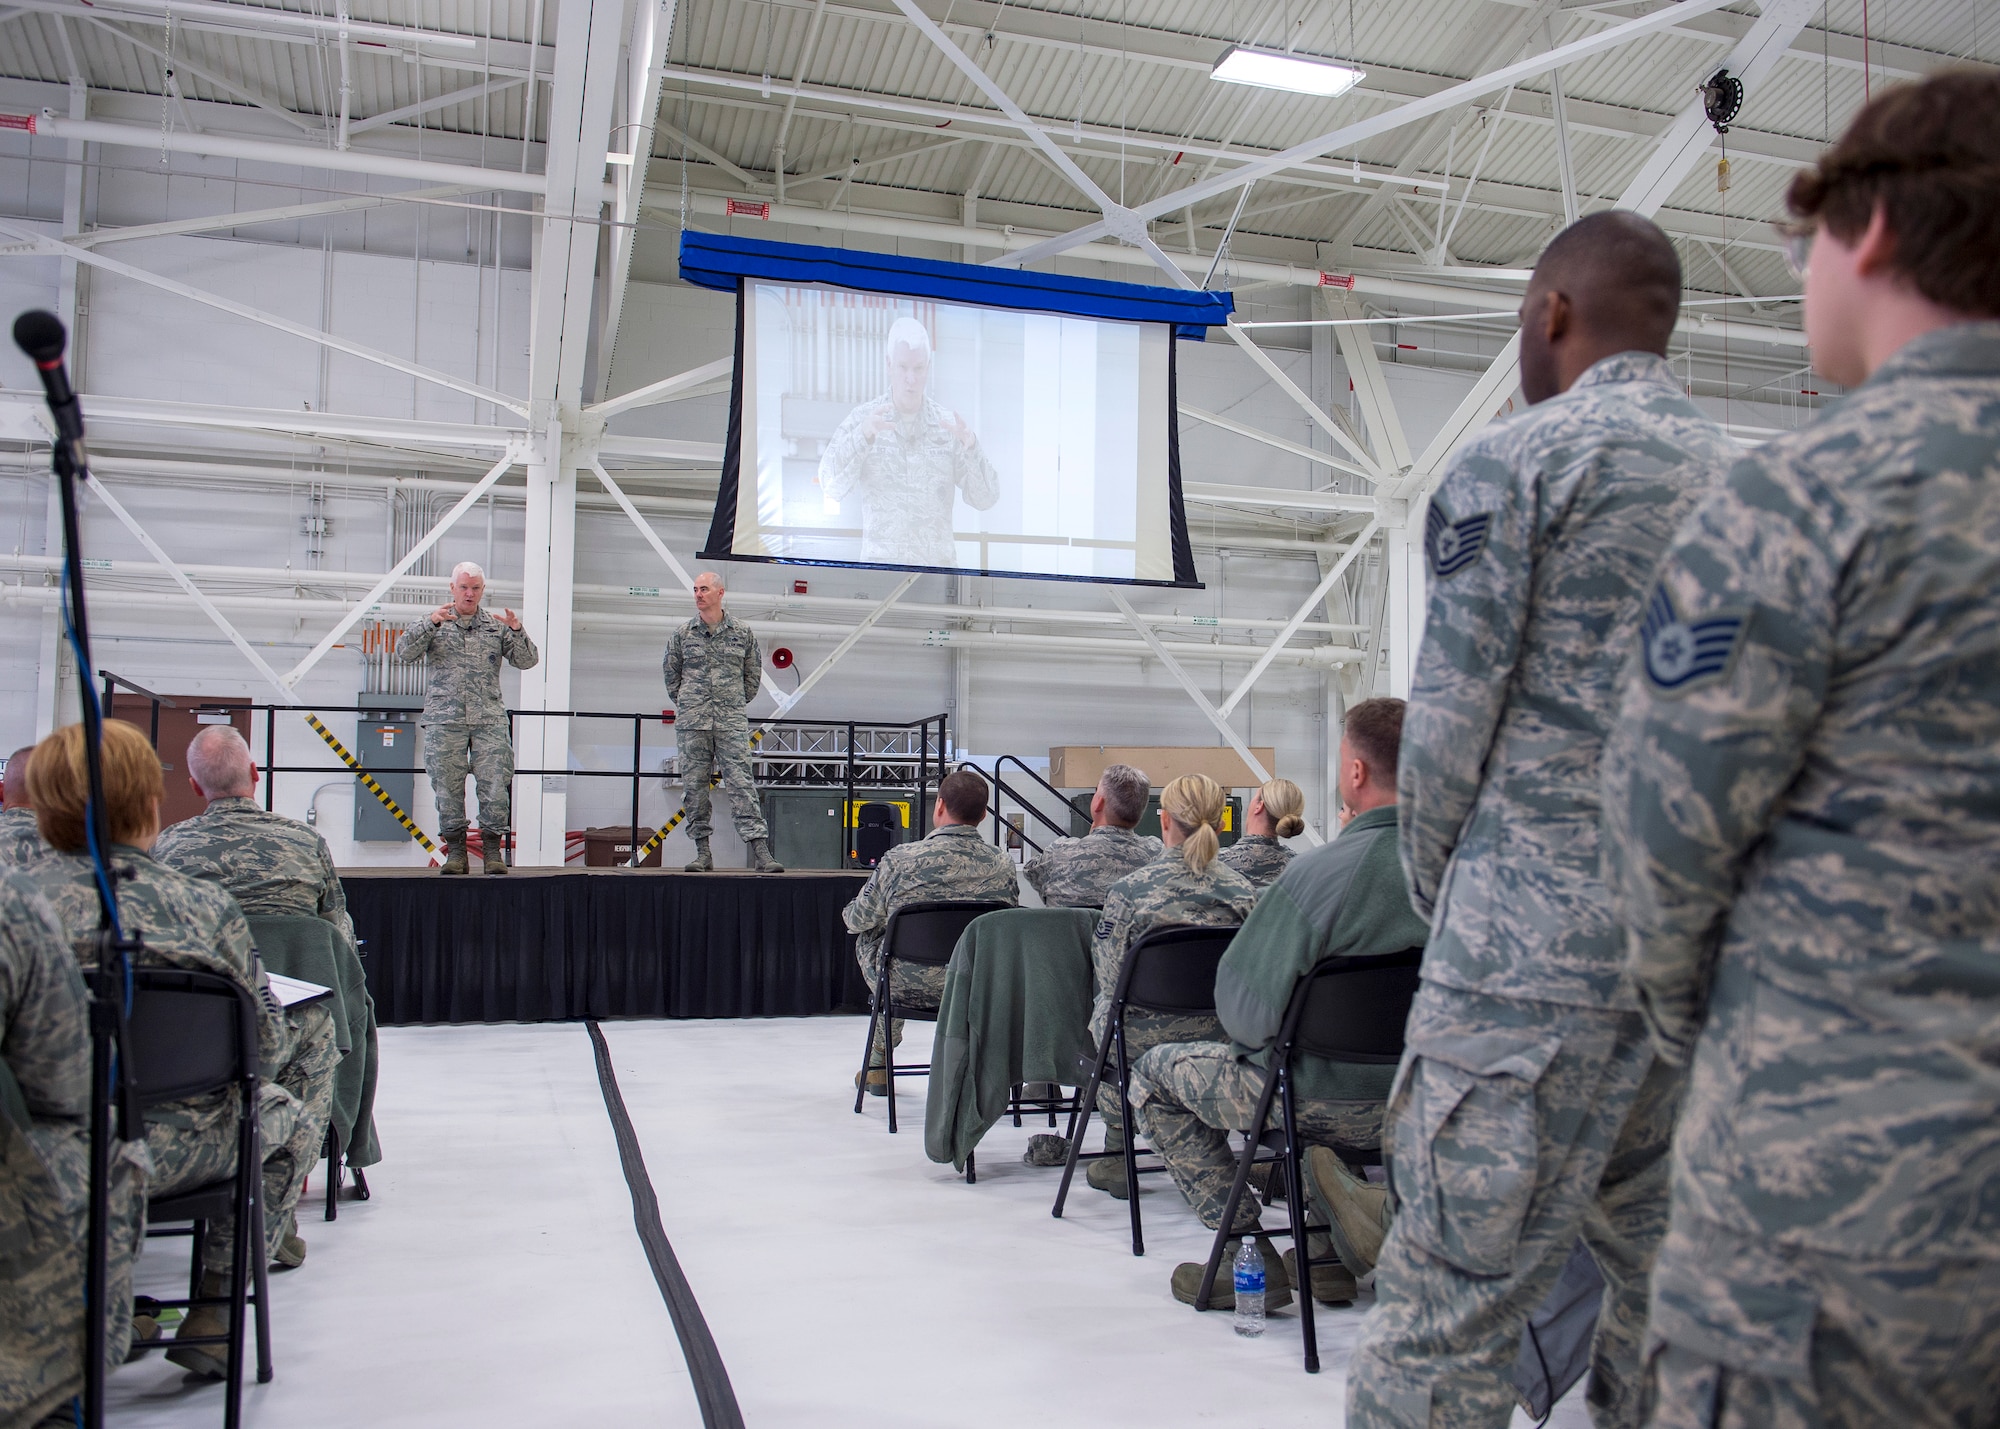 U.S. Air Force Lt. Gen. L. Scott Rice, director, Air National Guard, and Chief Master Sgt. Ronald Anderson, right, Command Chief of the Air National Guard answered questions from members of the 133rd Airlift Wing in St. Paul, Minn., March 25, 2018.